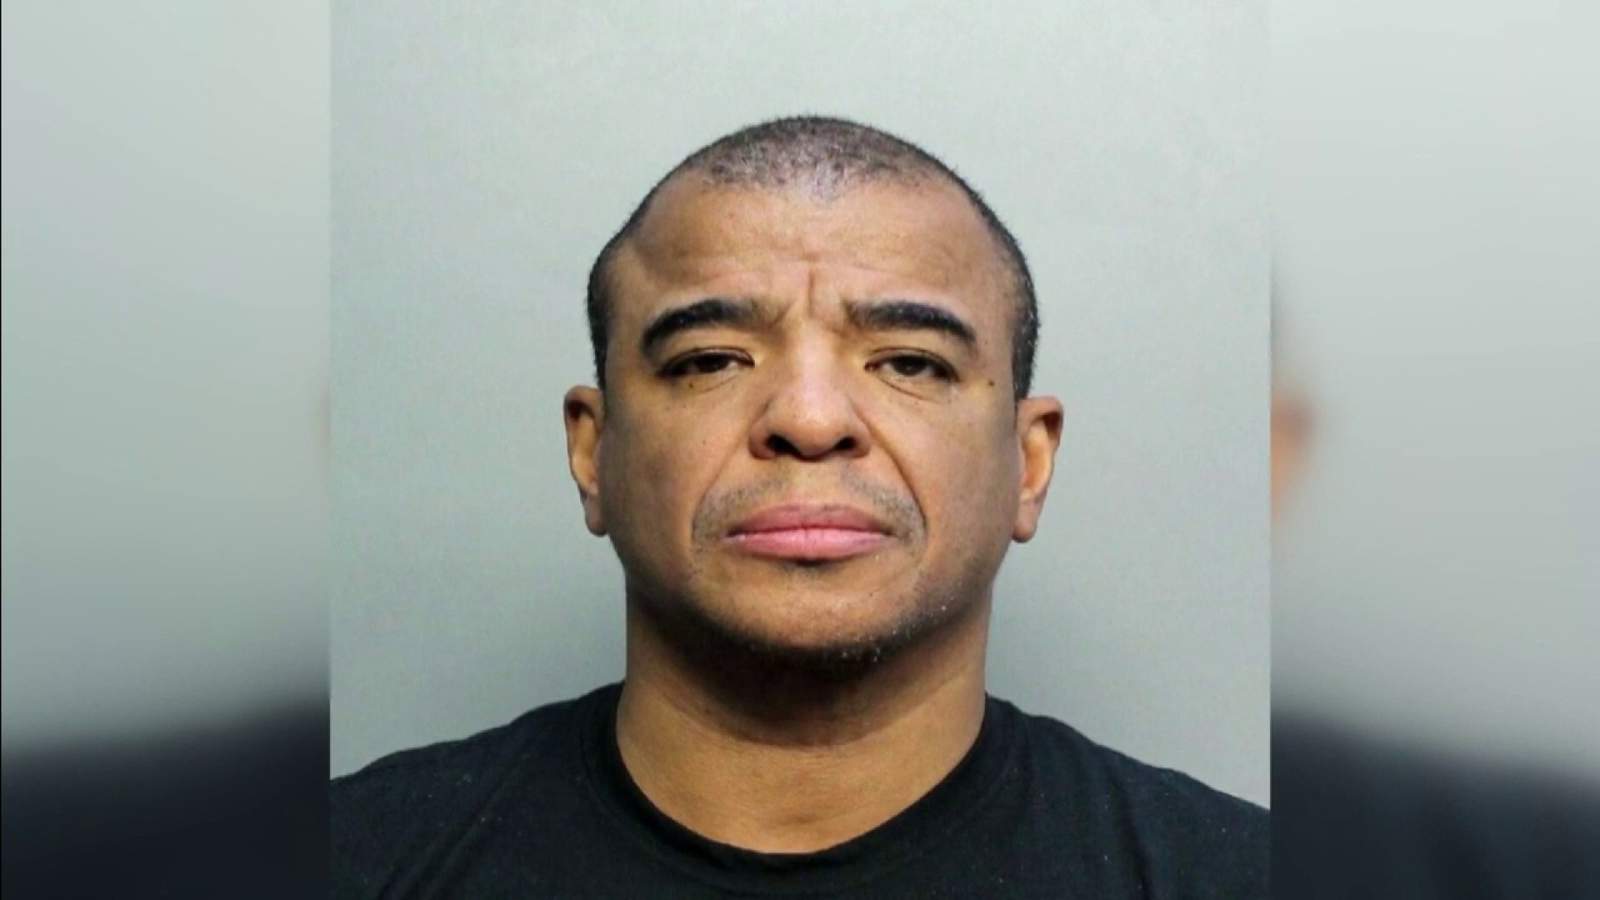 Florida DJ Erick Morillo found dead less than month after rape charge